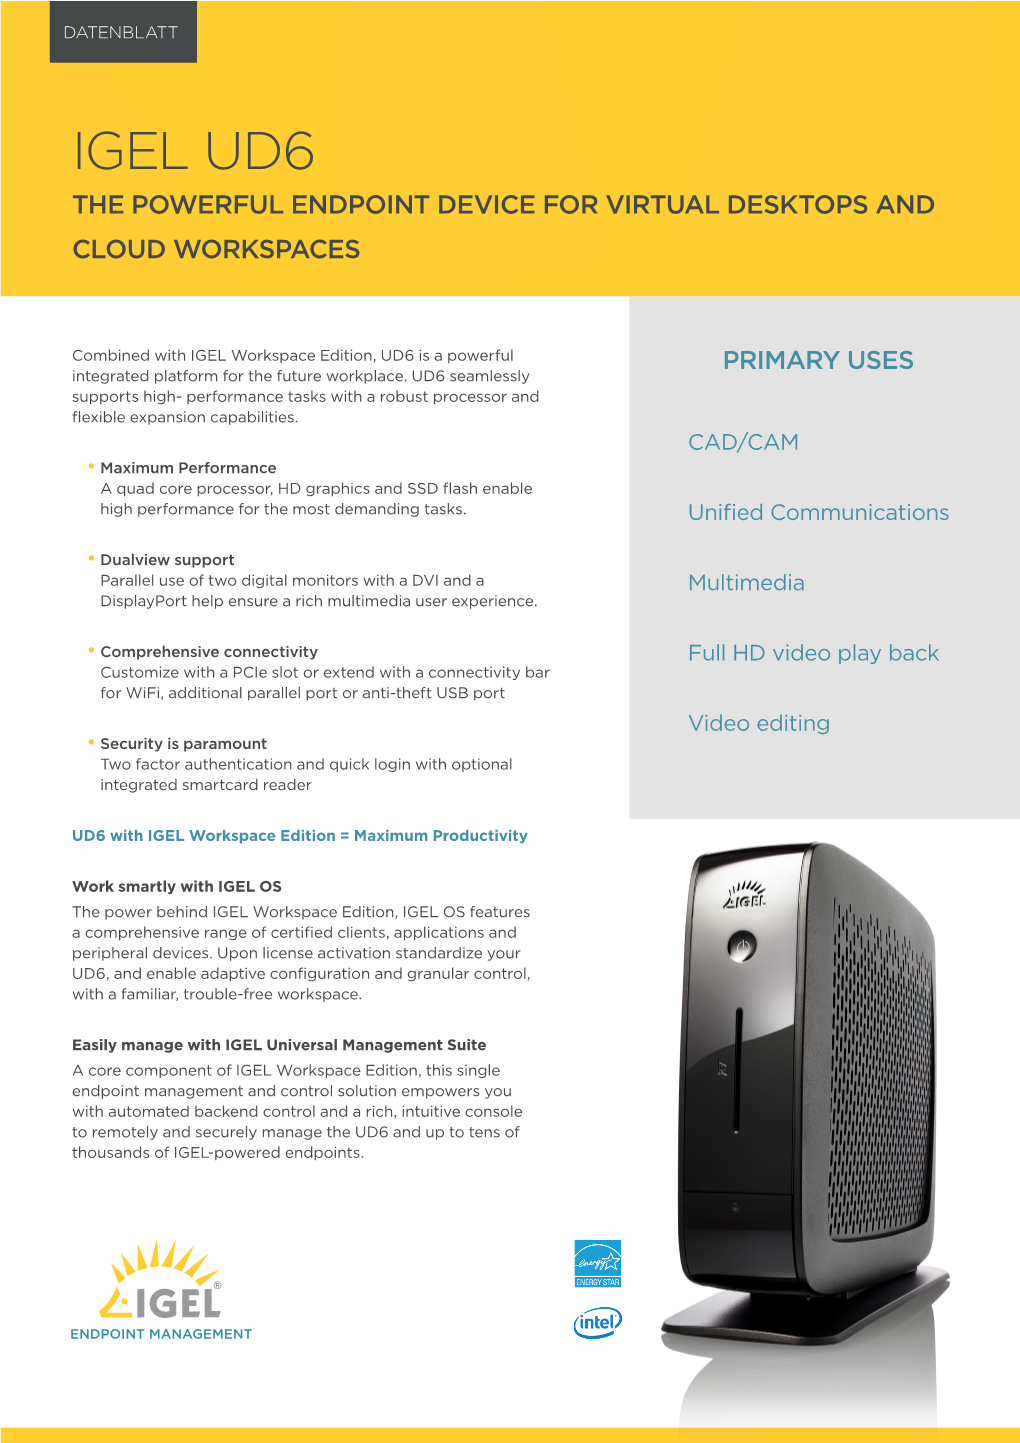 Igel Ud6 the Powerful Endpoint Device for Virtual Desktops and Cloud Workspaces